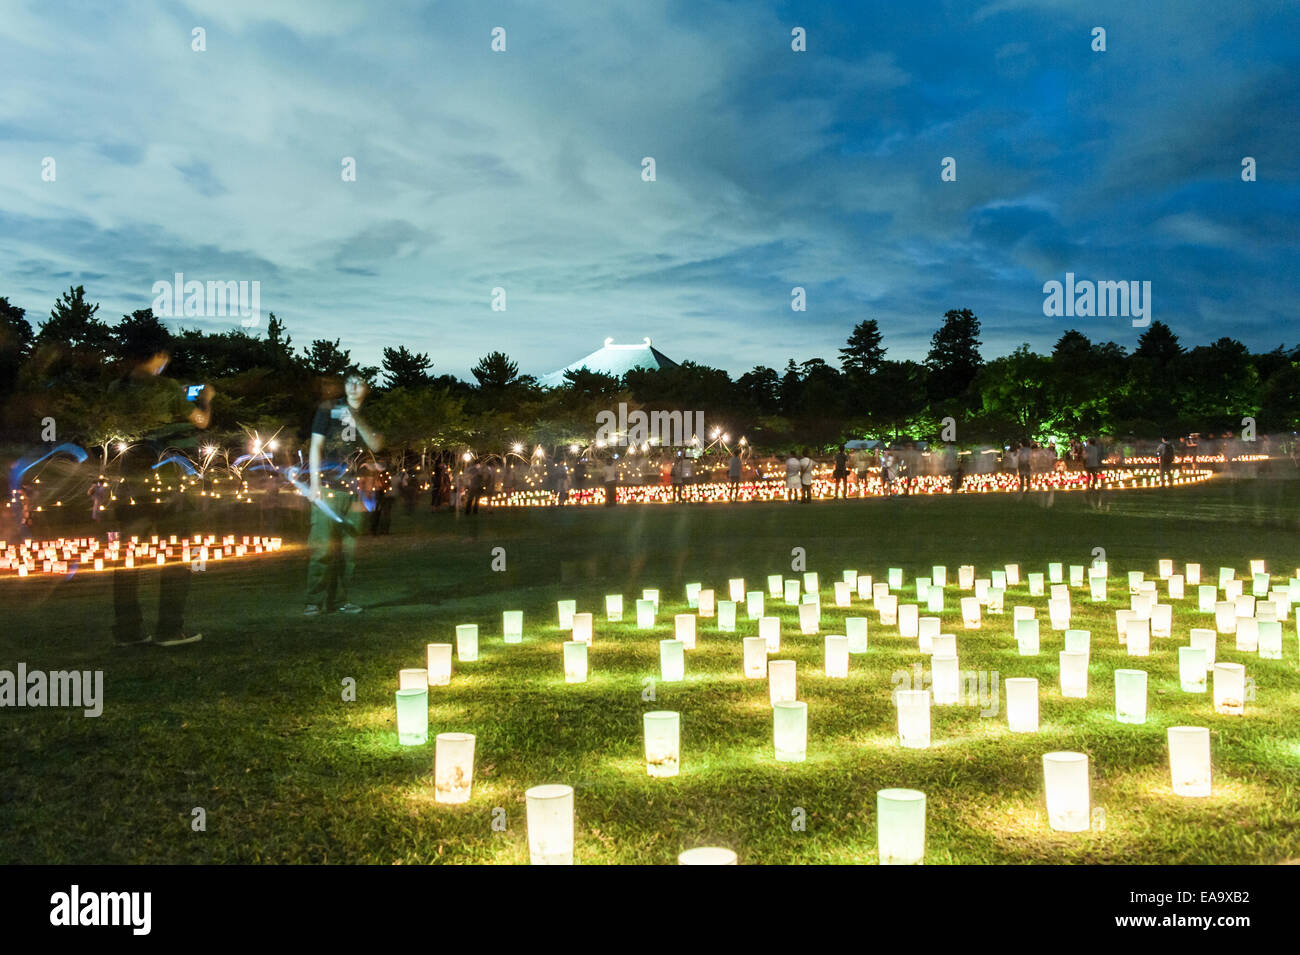 During the Obon festival in August 14th and 15th thousands of lanterns are lit in Nara, Japan to honor ancestors. Stock Photo